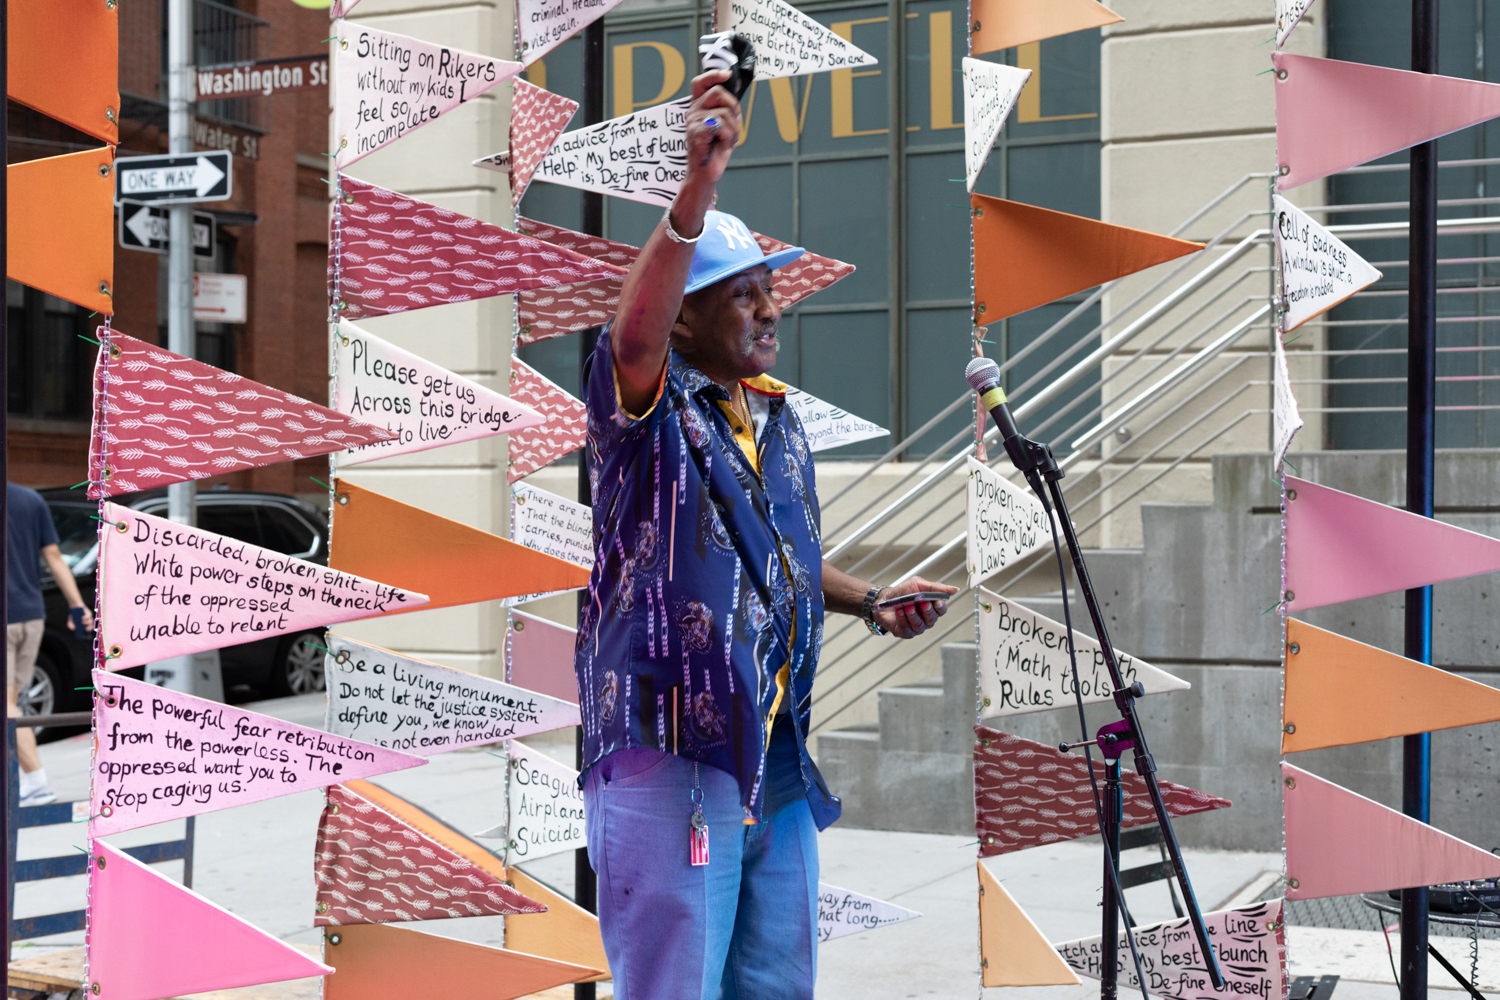 A Black man stands with their hand raised in the air. Behind him are strands of triangular shaped flags strung together in a vertical orientation. Some of the flags have handwritten text.